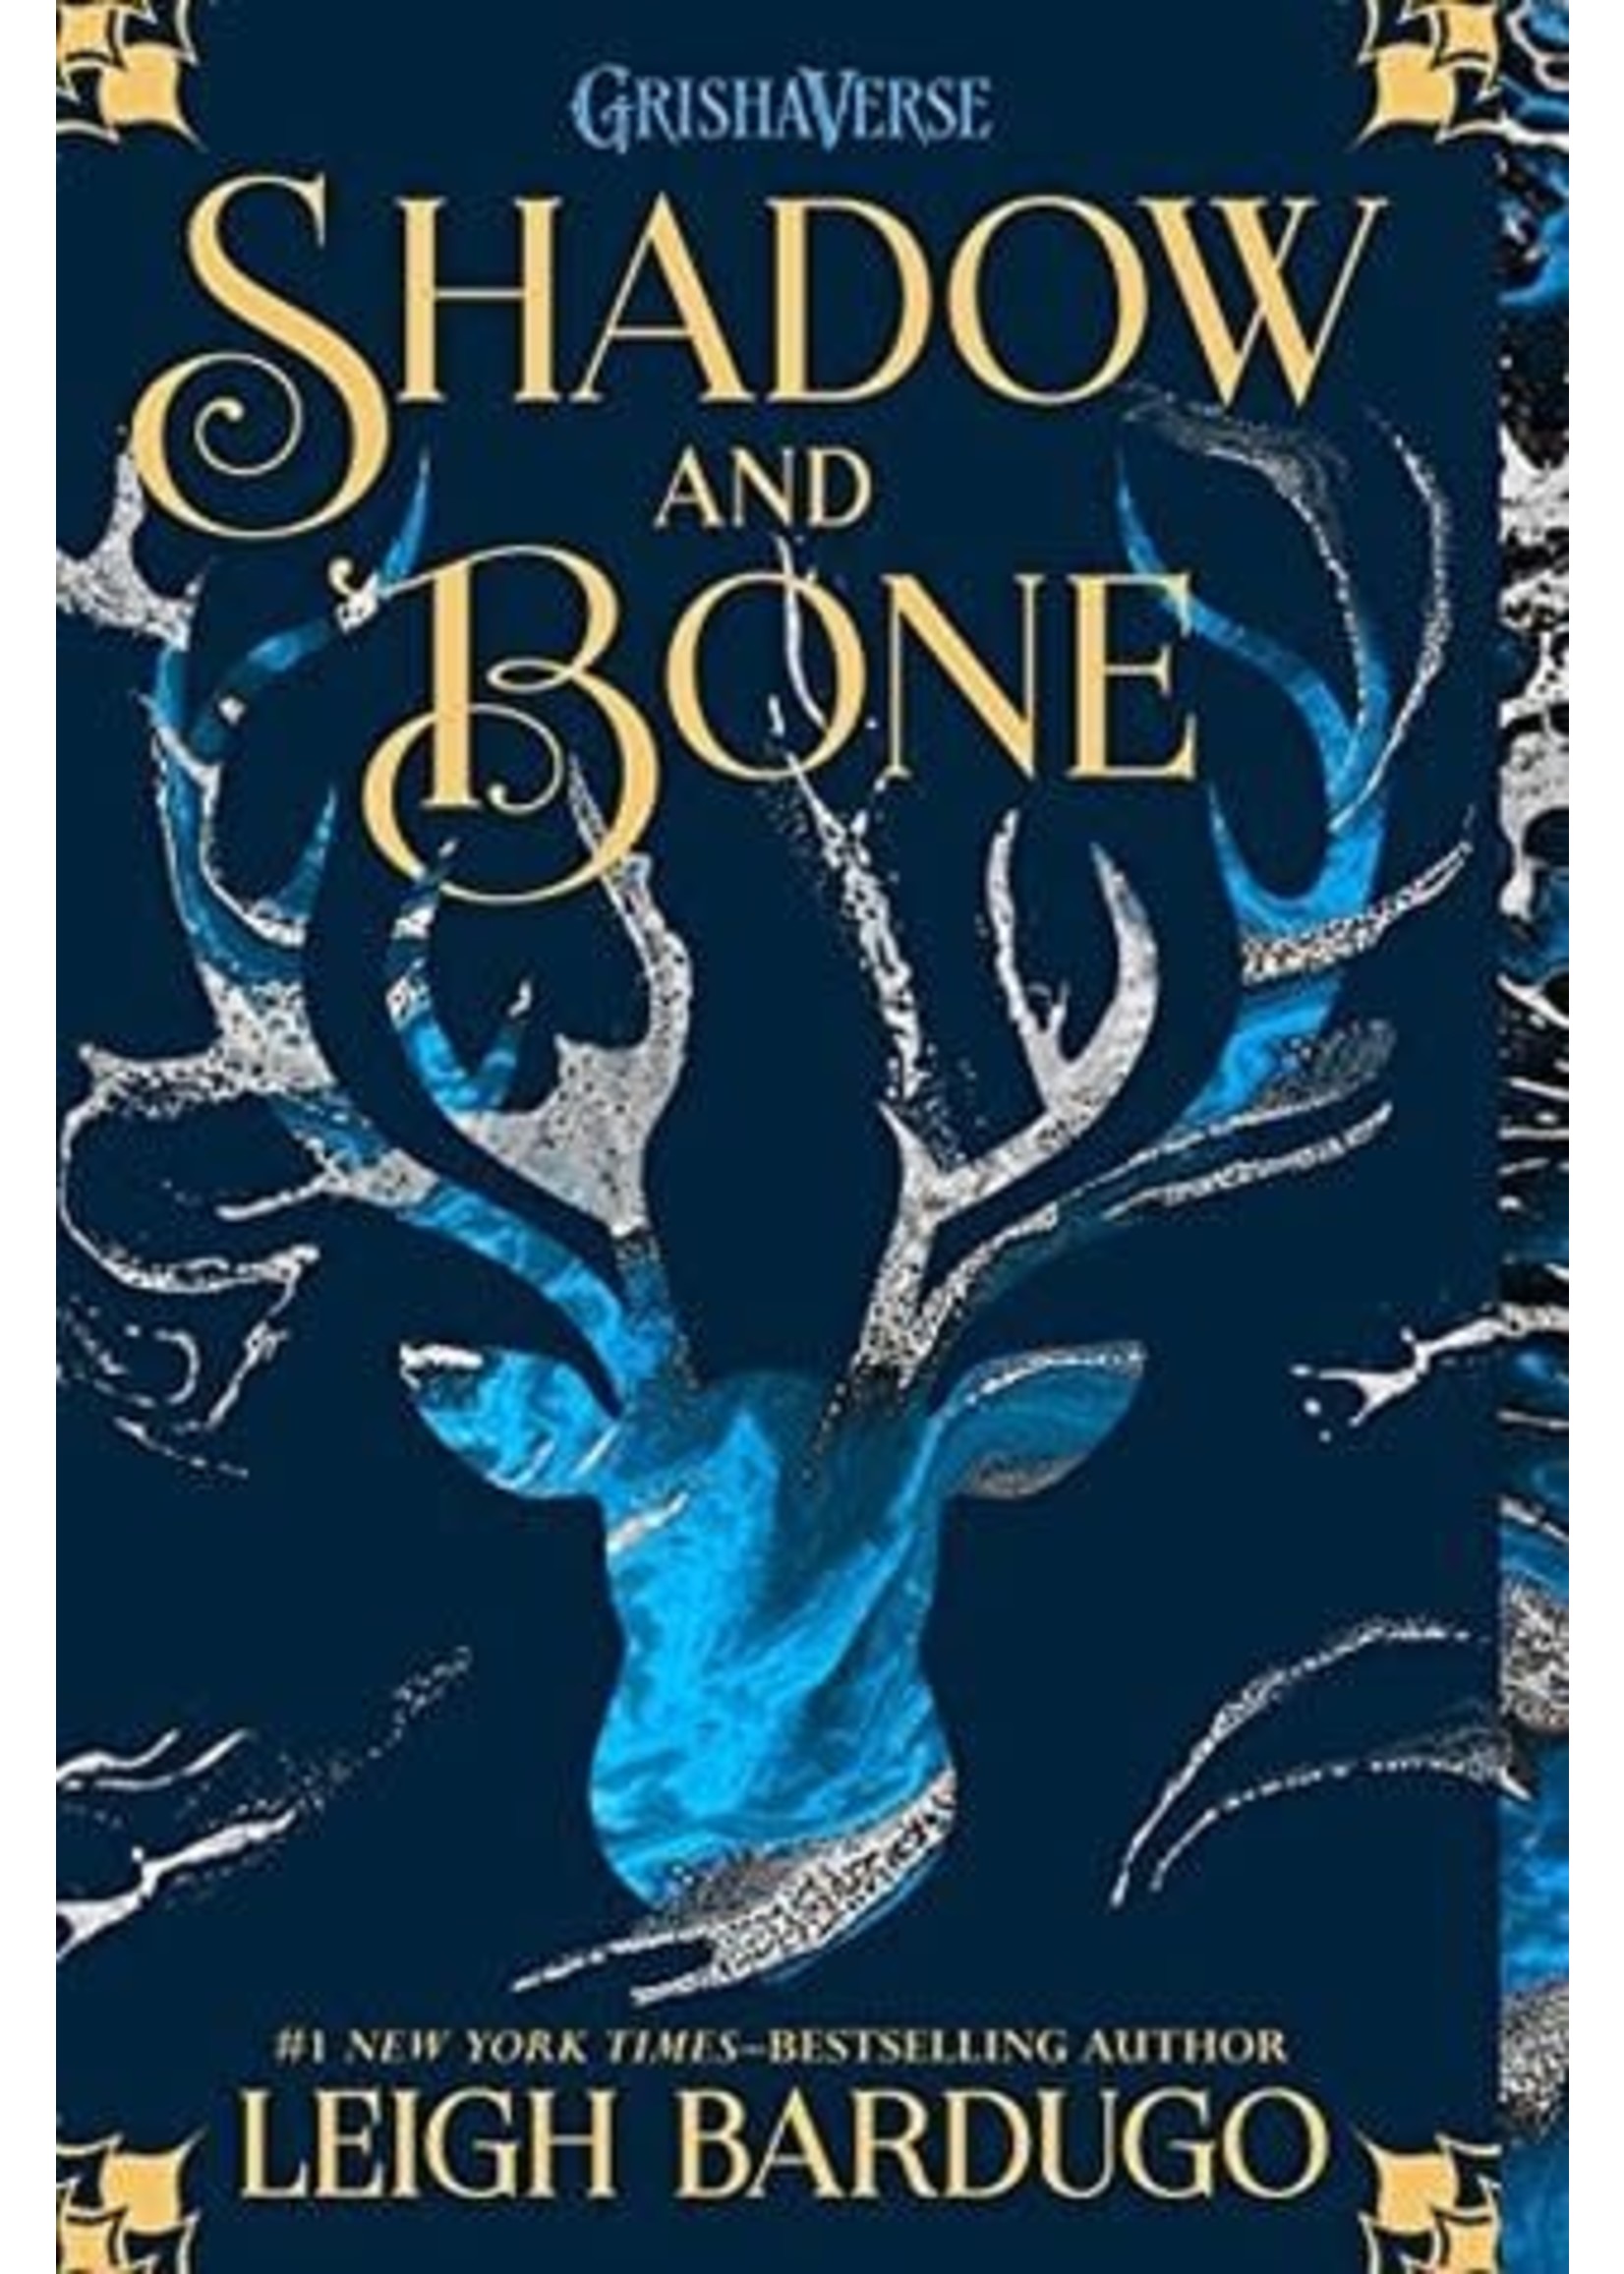 Shadow and Bone (The Shadow and Bone Trilogy #1) by Leigh Bardugo